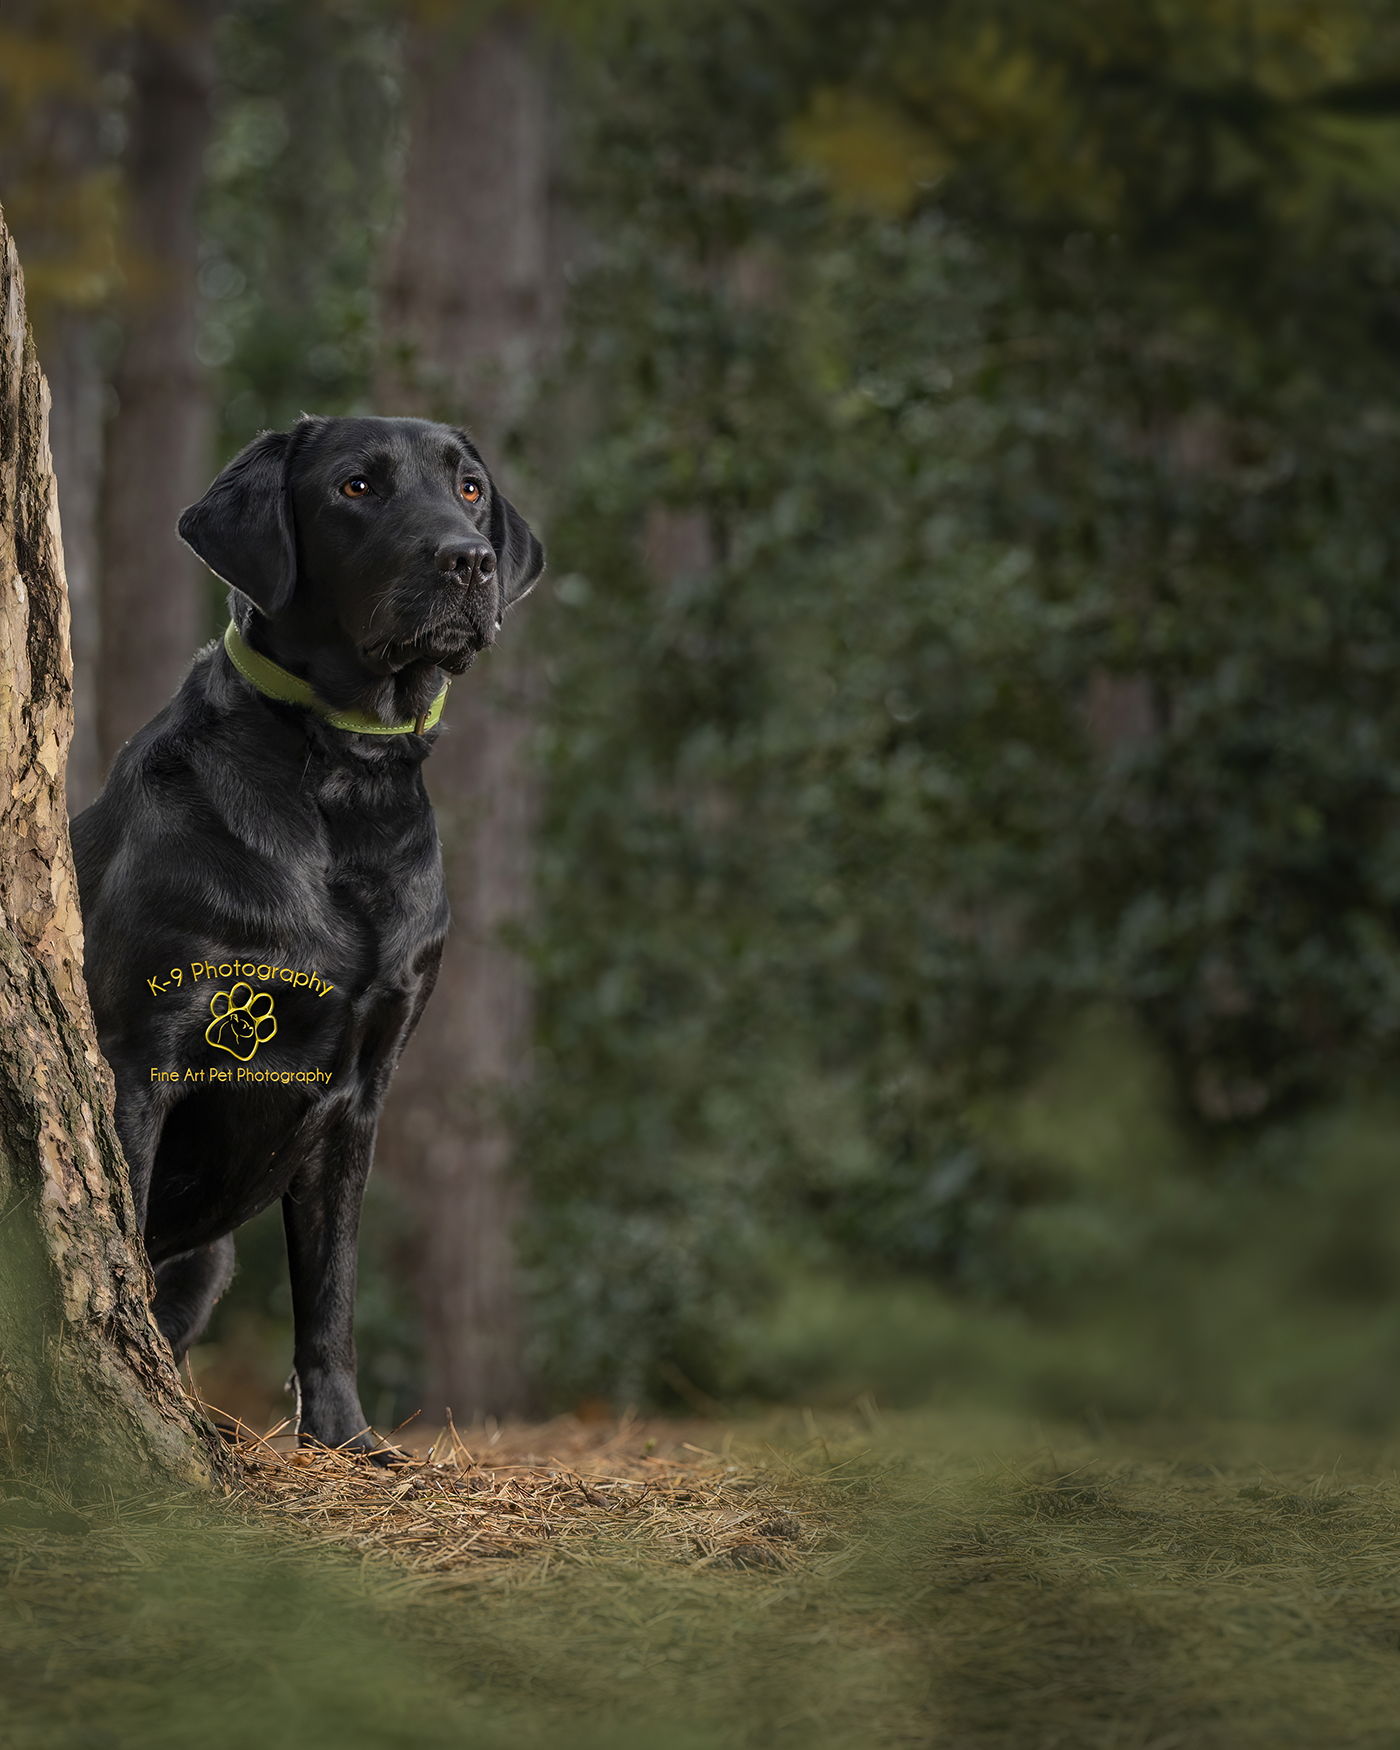 Dog and Pet Photography specialist in Bedford, Bedfordshire |photographed in the studio by award winning Dog and Pet photographer Adrian Bullers